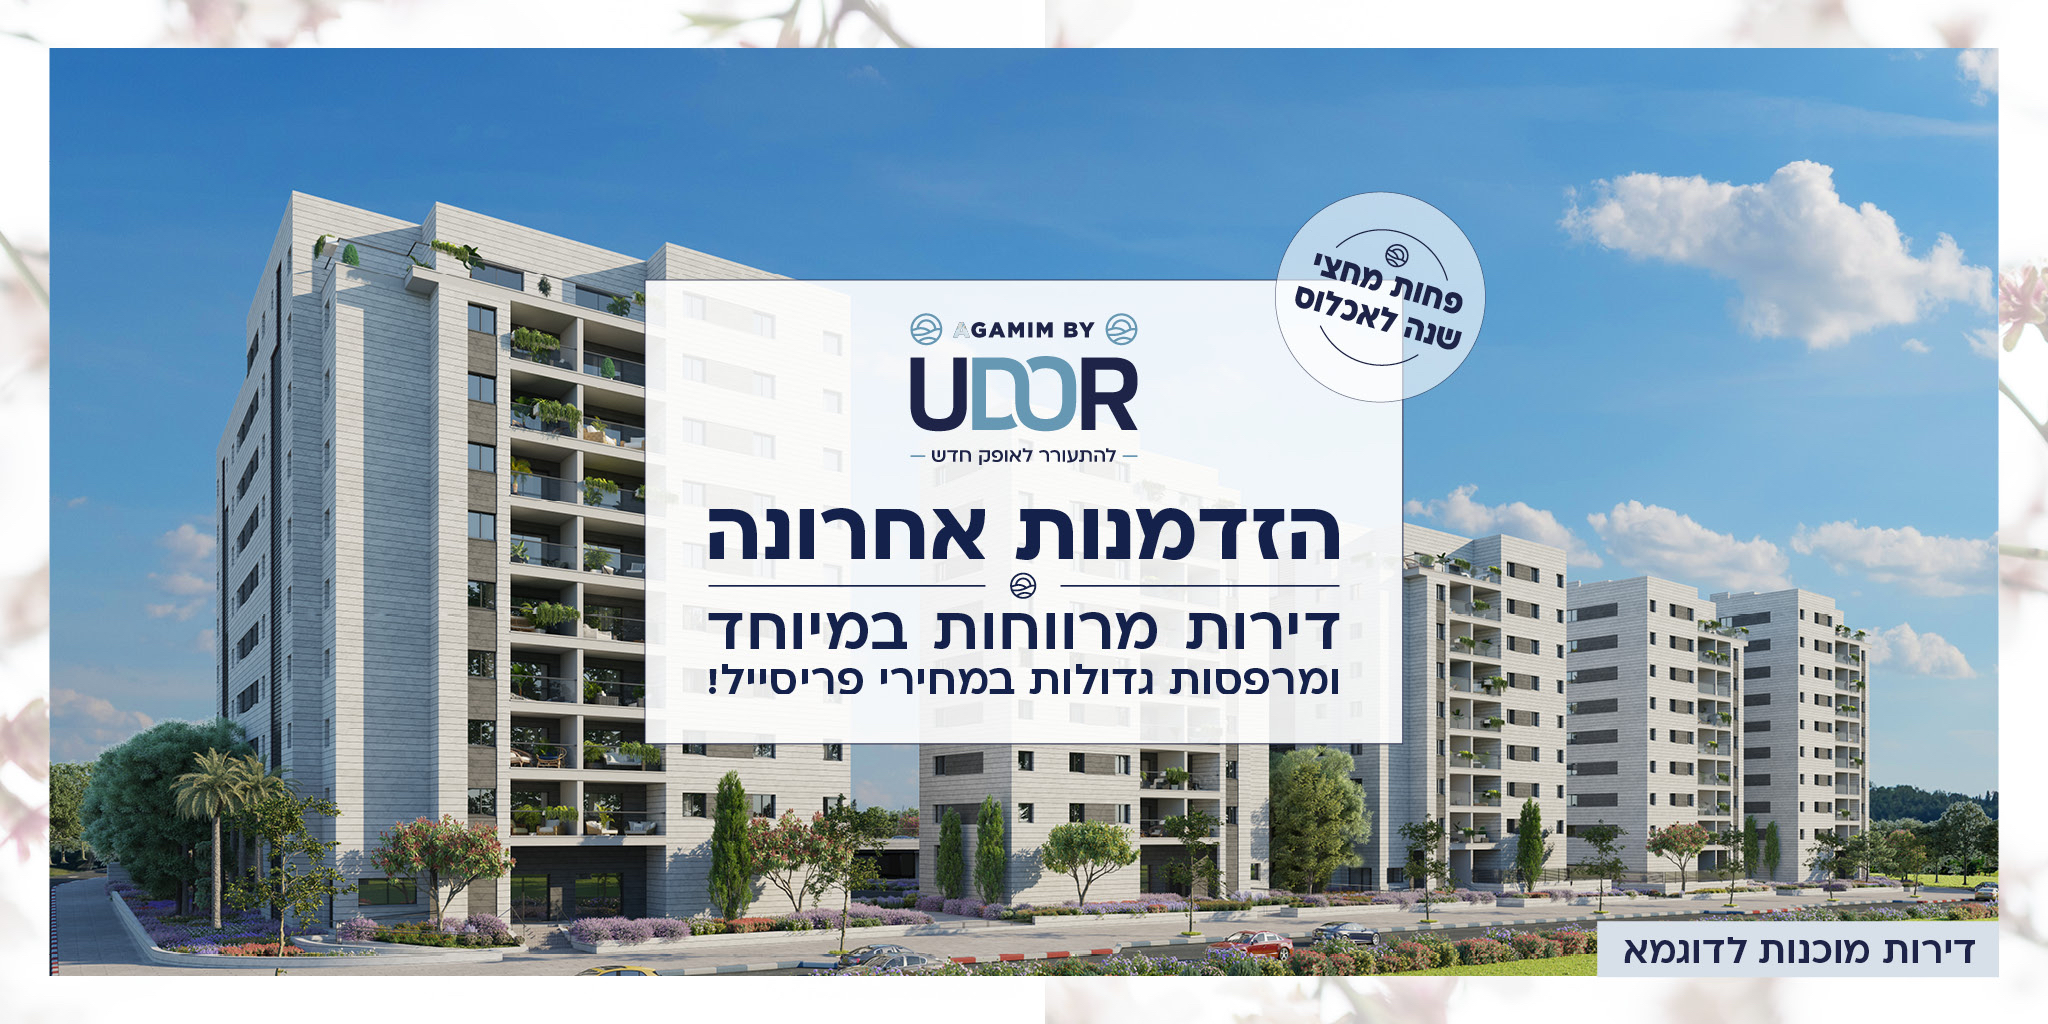 Agamim by Udor